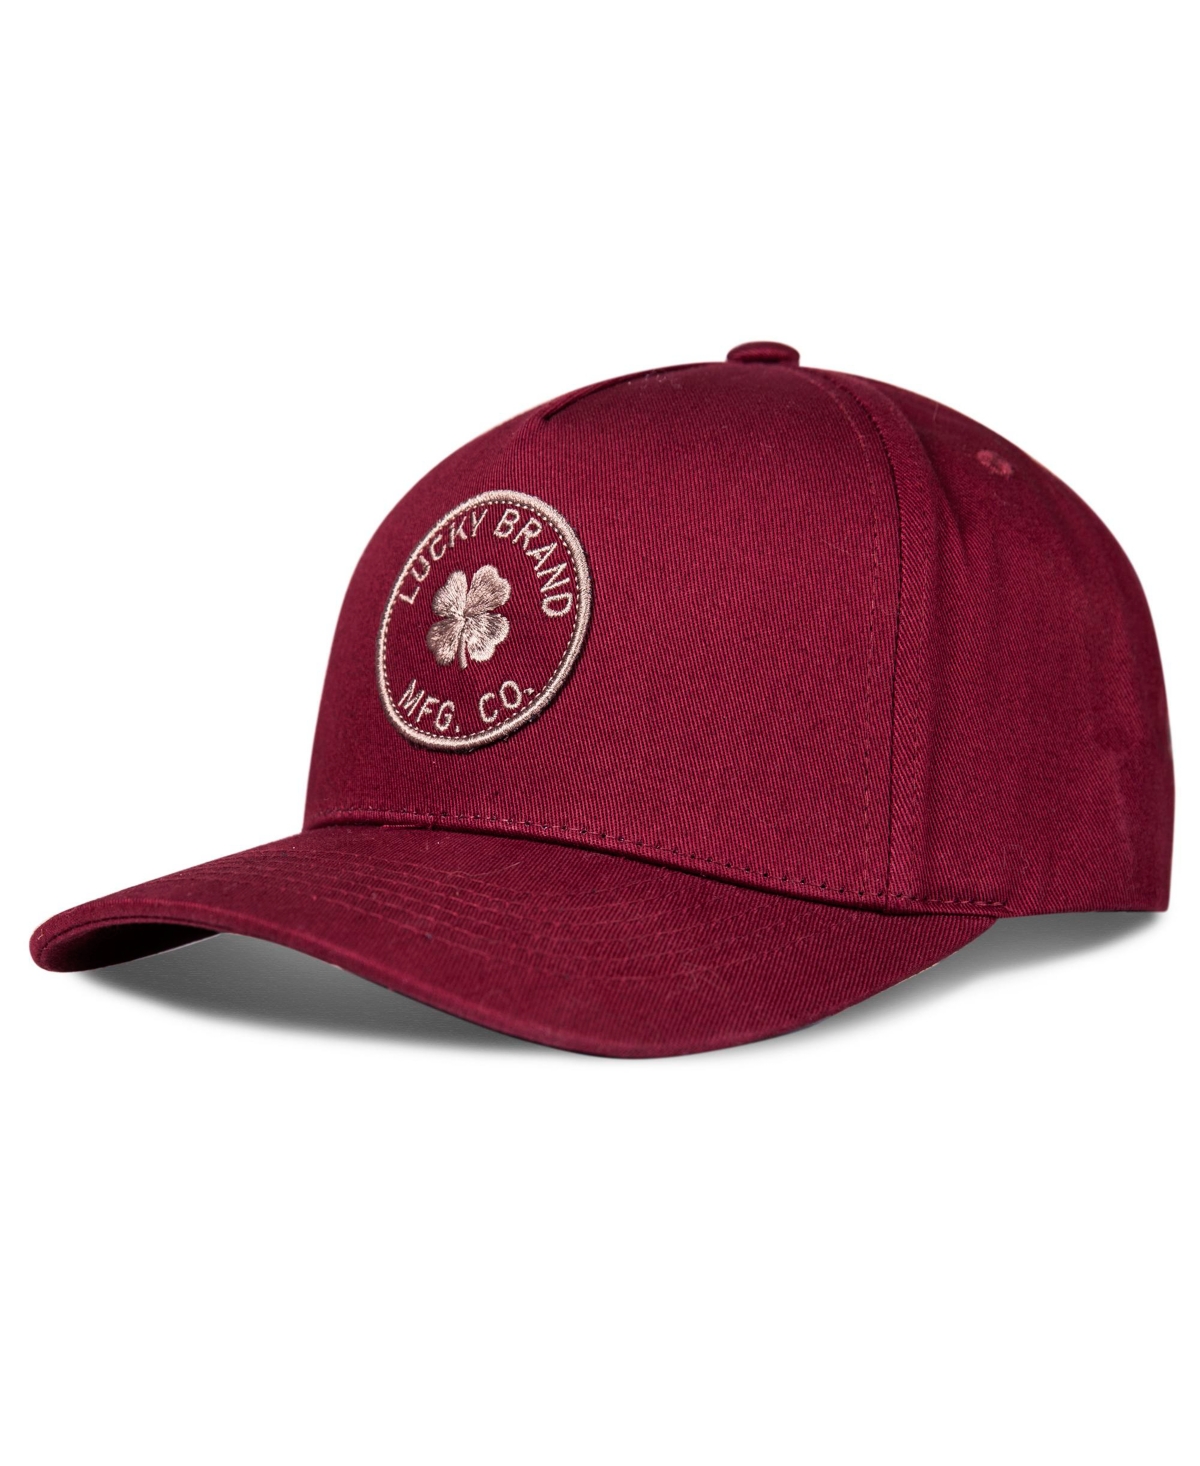 Lucky Brand Women's Mfg Co. Patch Hat In Cardinal